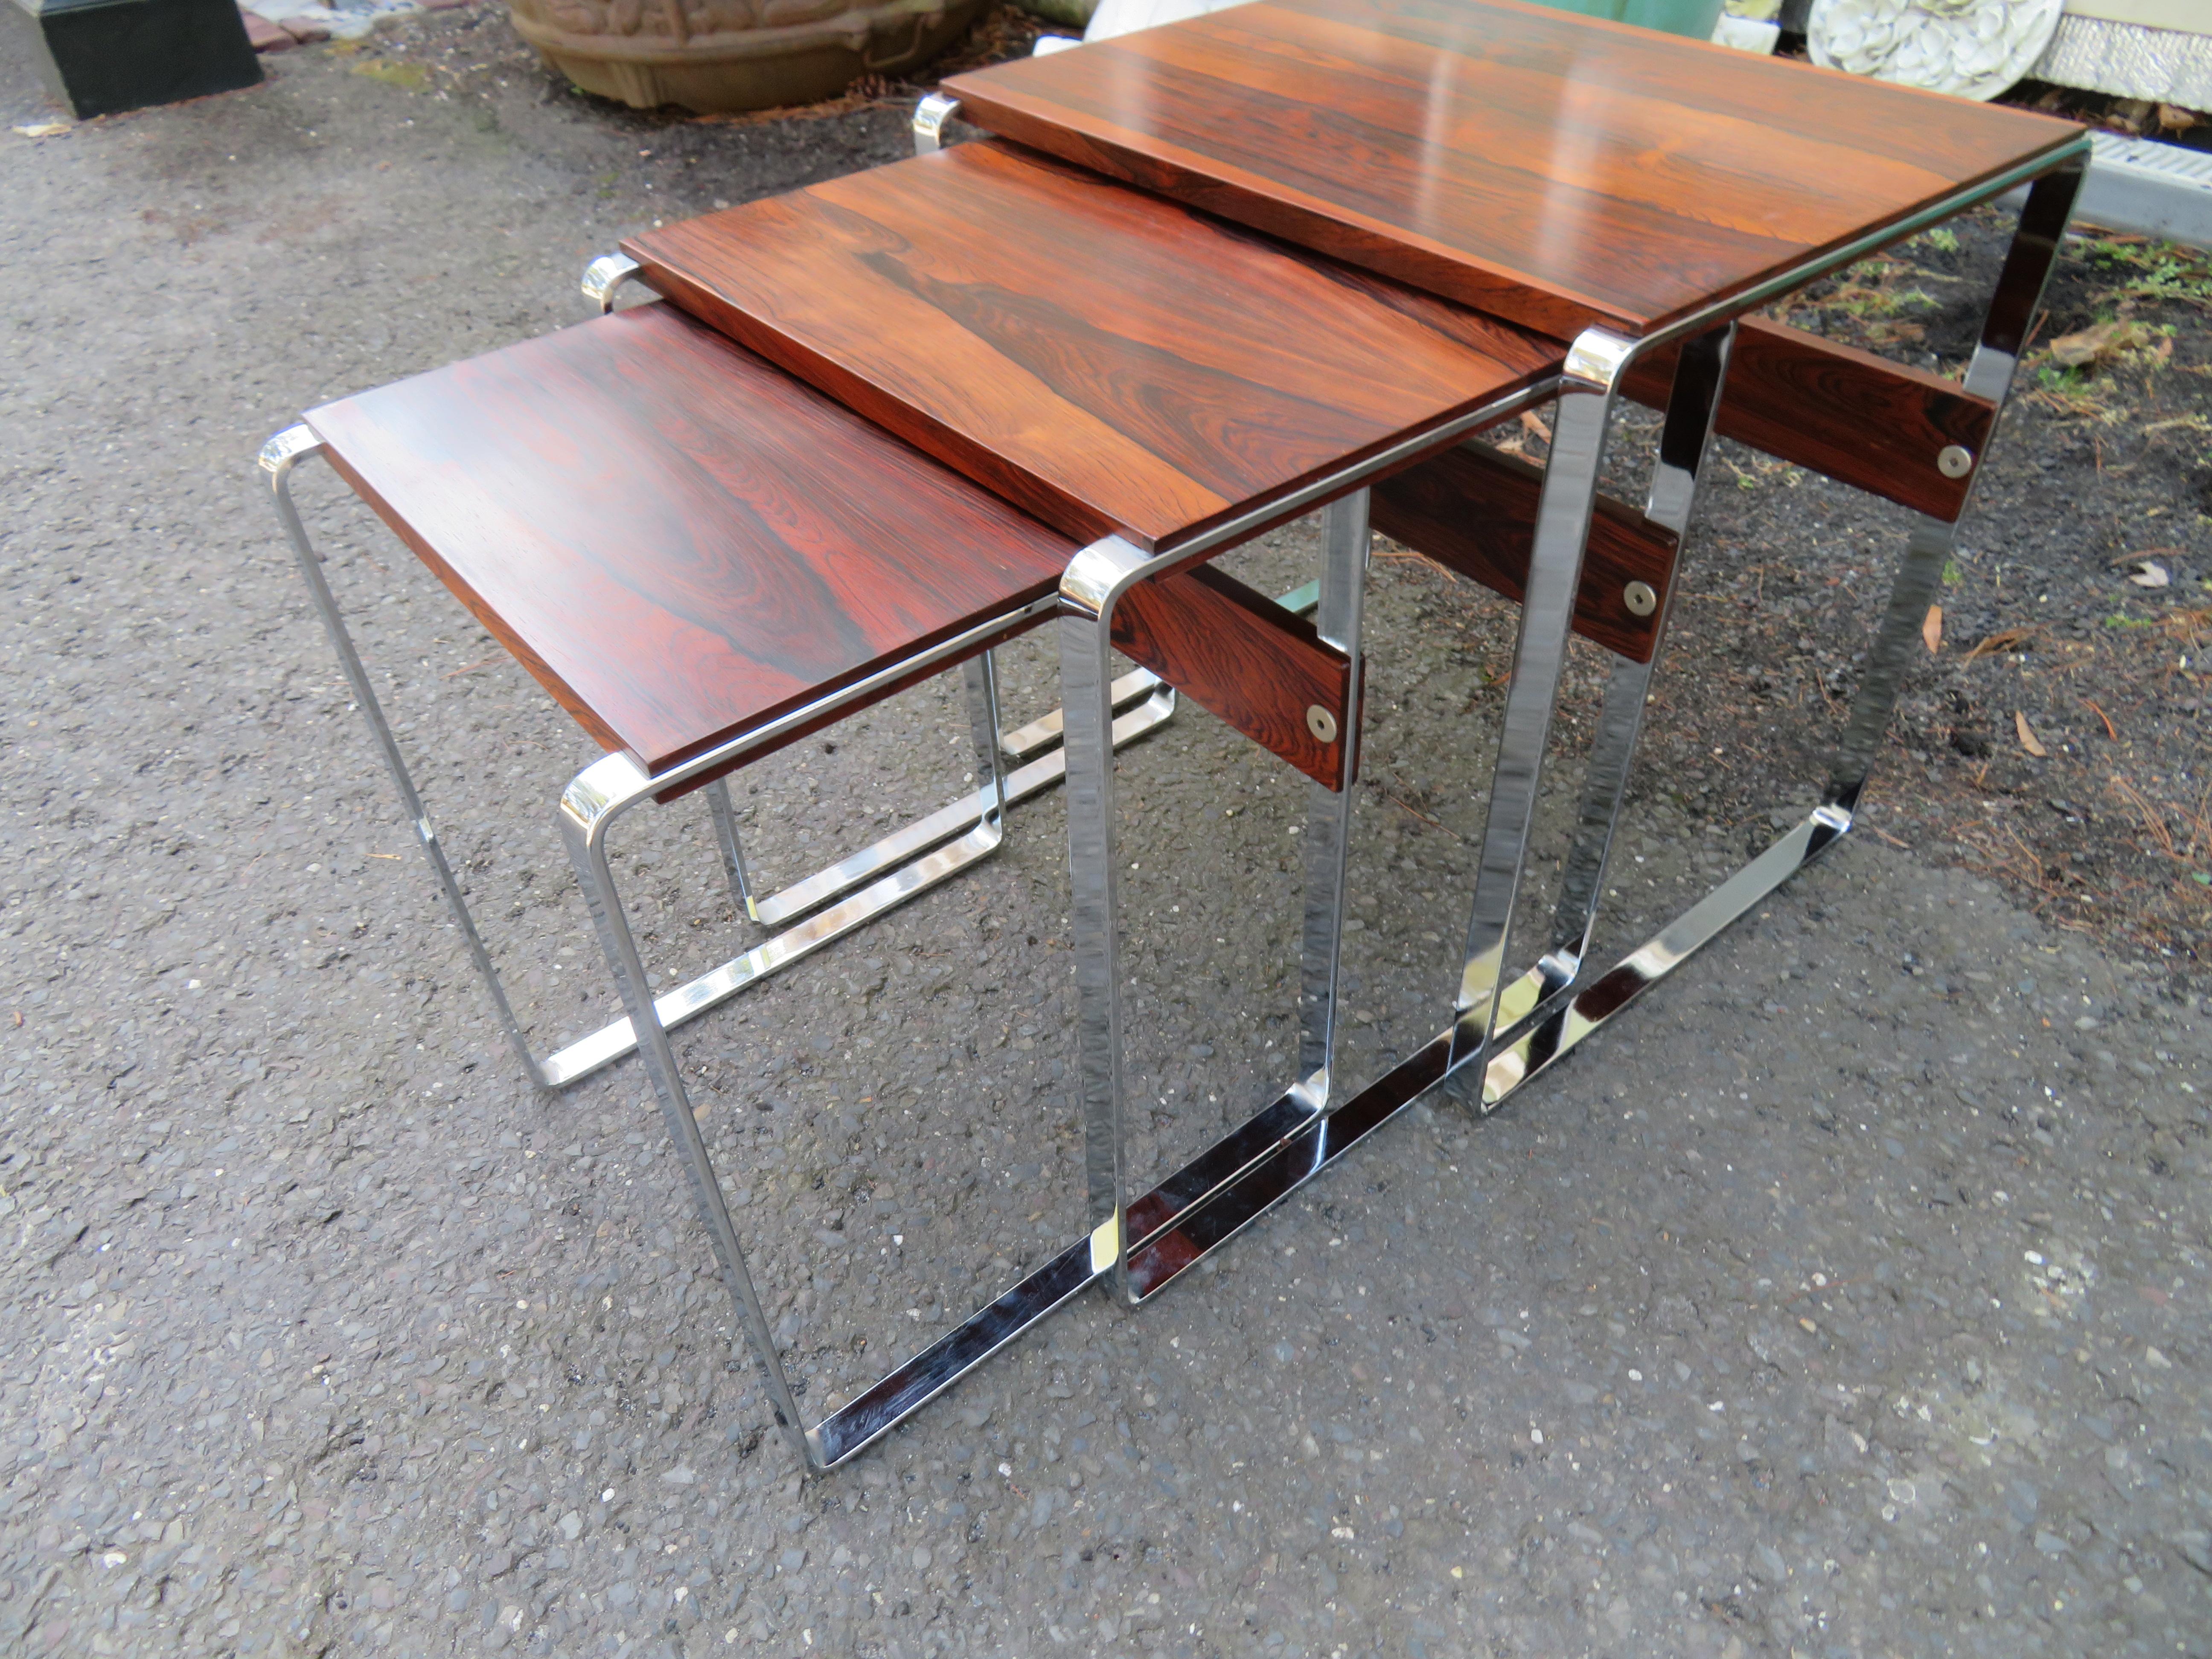 Fabulous Rosewood Chrome Nesting Stacking Tables Richard Young Mid-Century In Good Condition For Sale In Pemberton, NJ